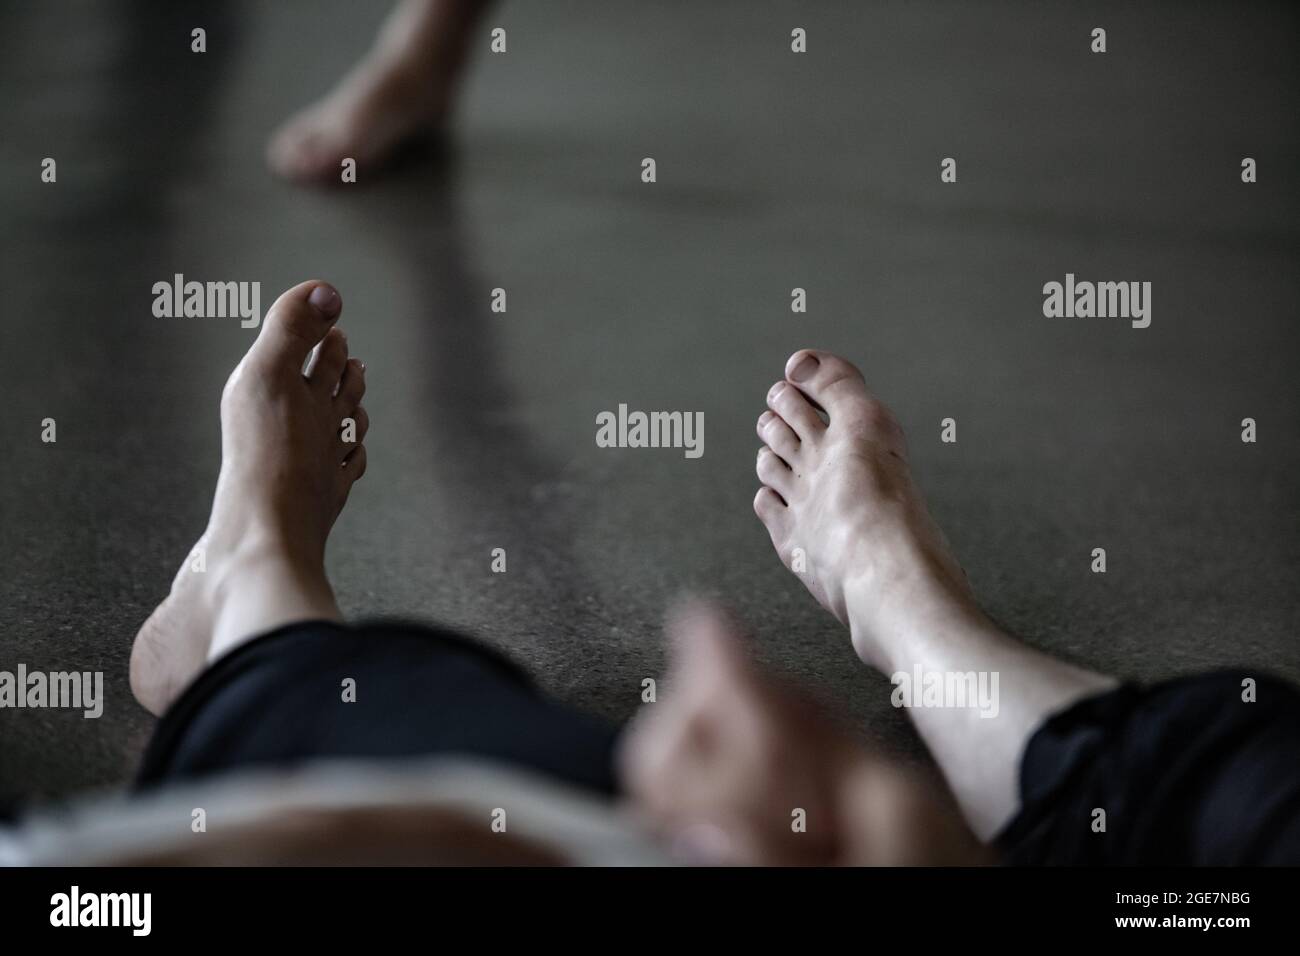 dancers foots, legs, on floor on blurred background Stock Photo